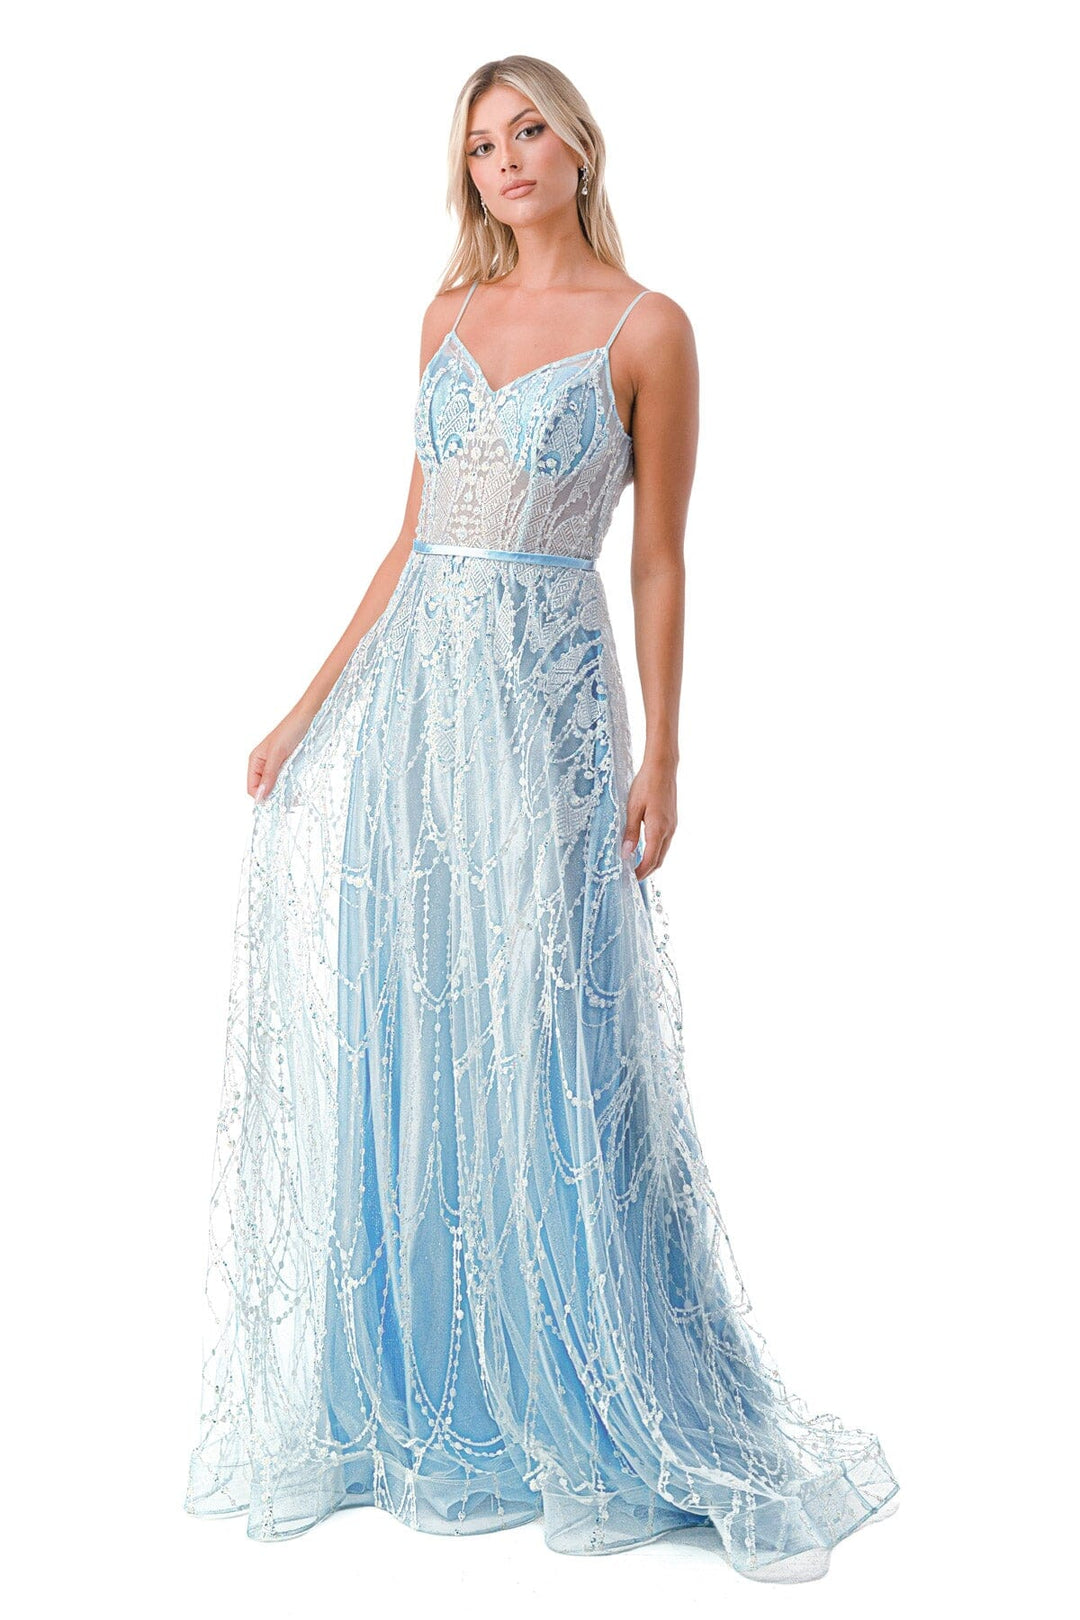 Embellished Sheer Sweetheart A-line Gown by Coya L2775B